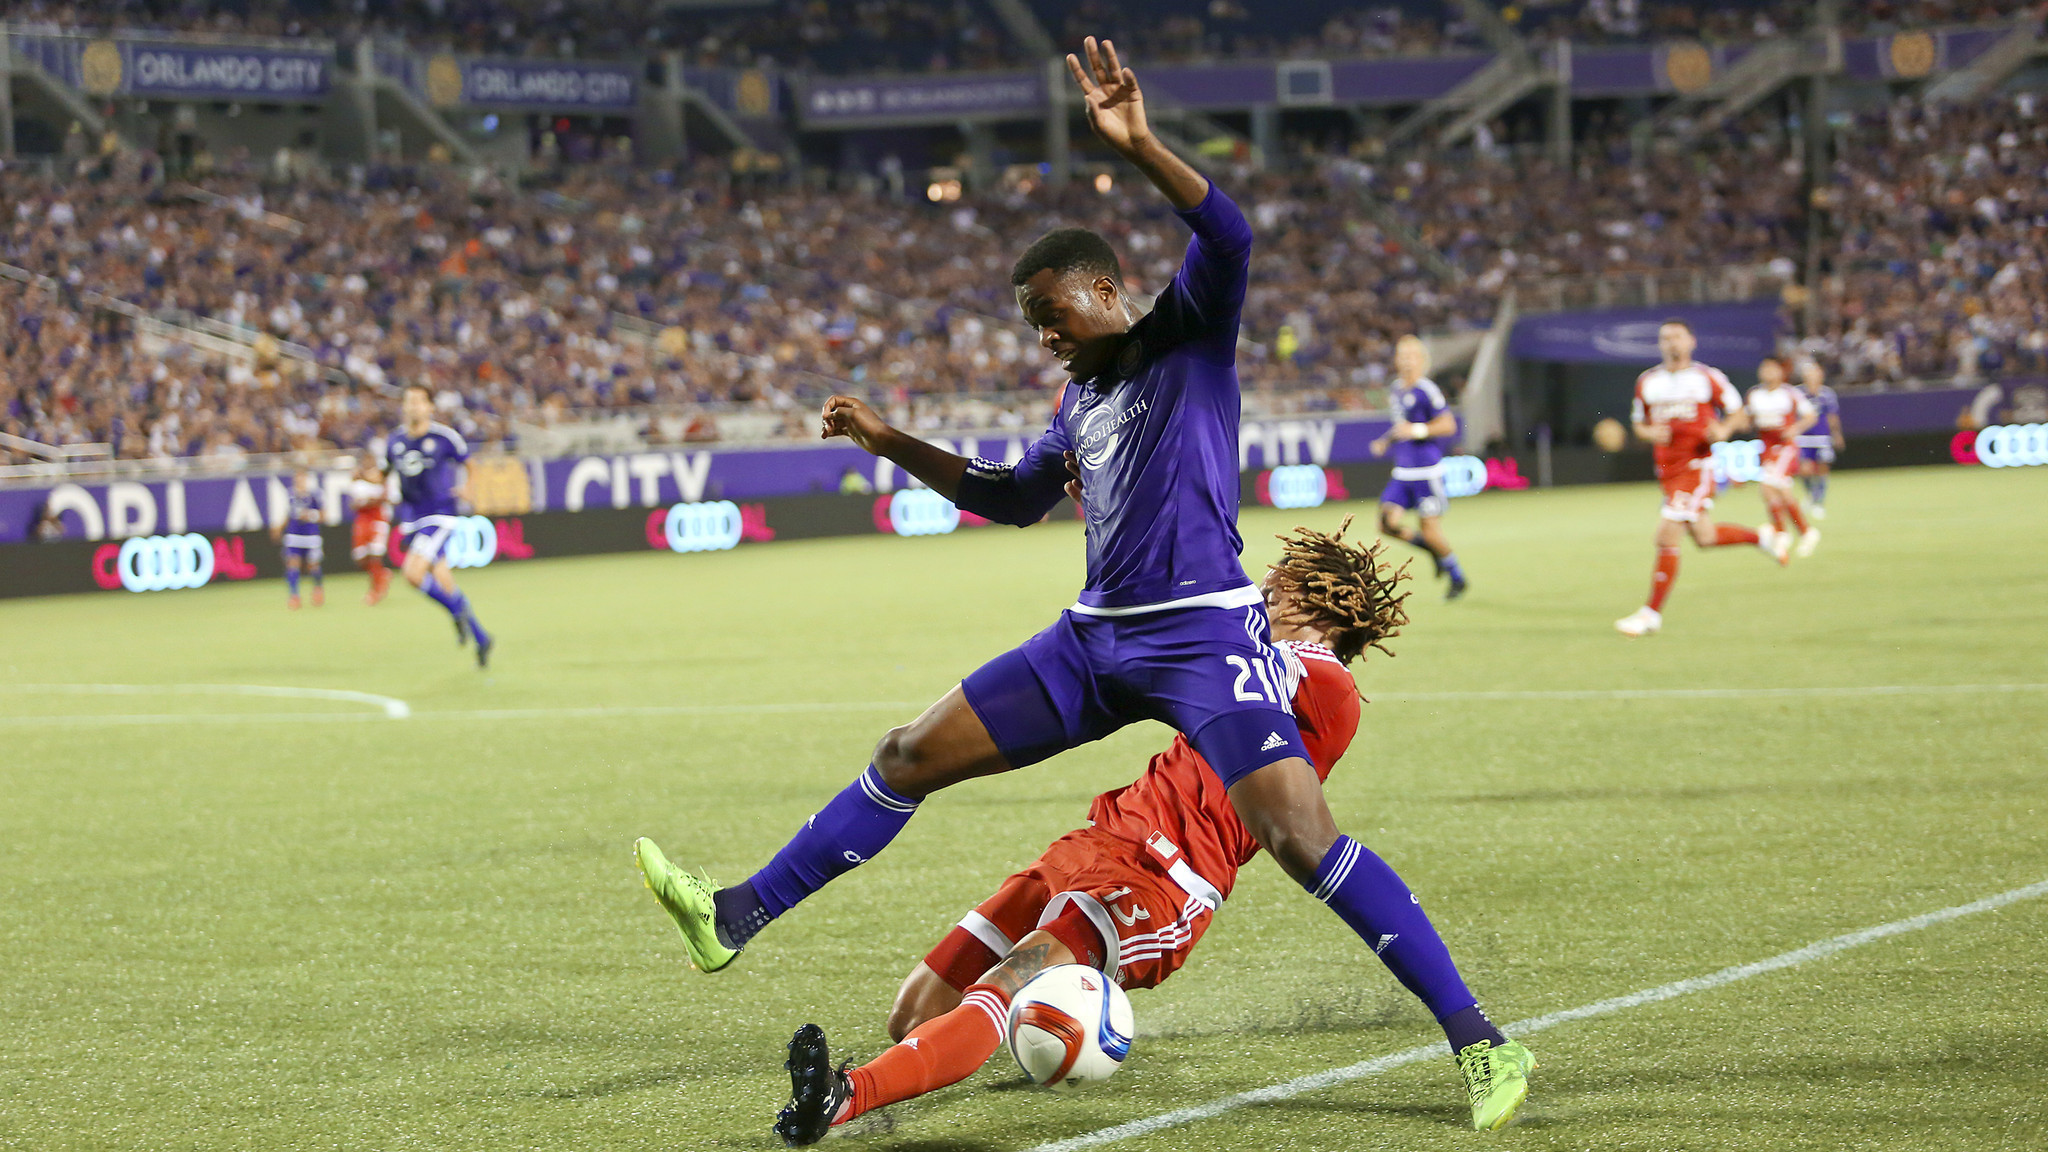 2048x1152 Orlando City rookie Cyle Larin continues to show progress